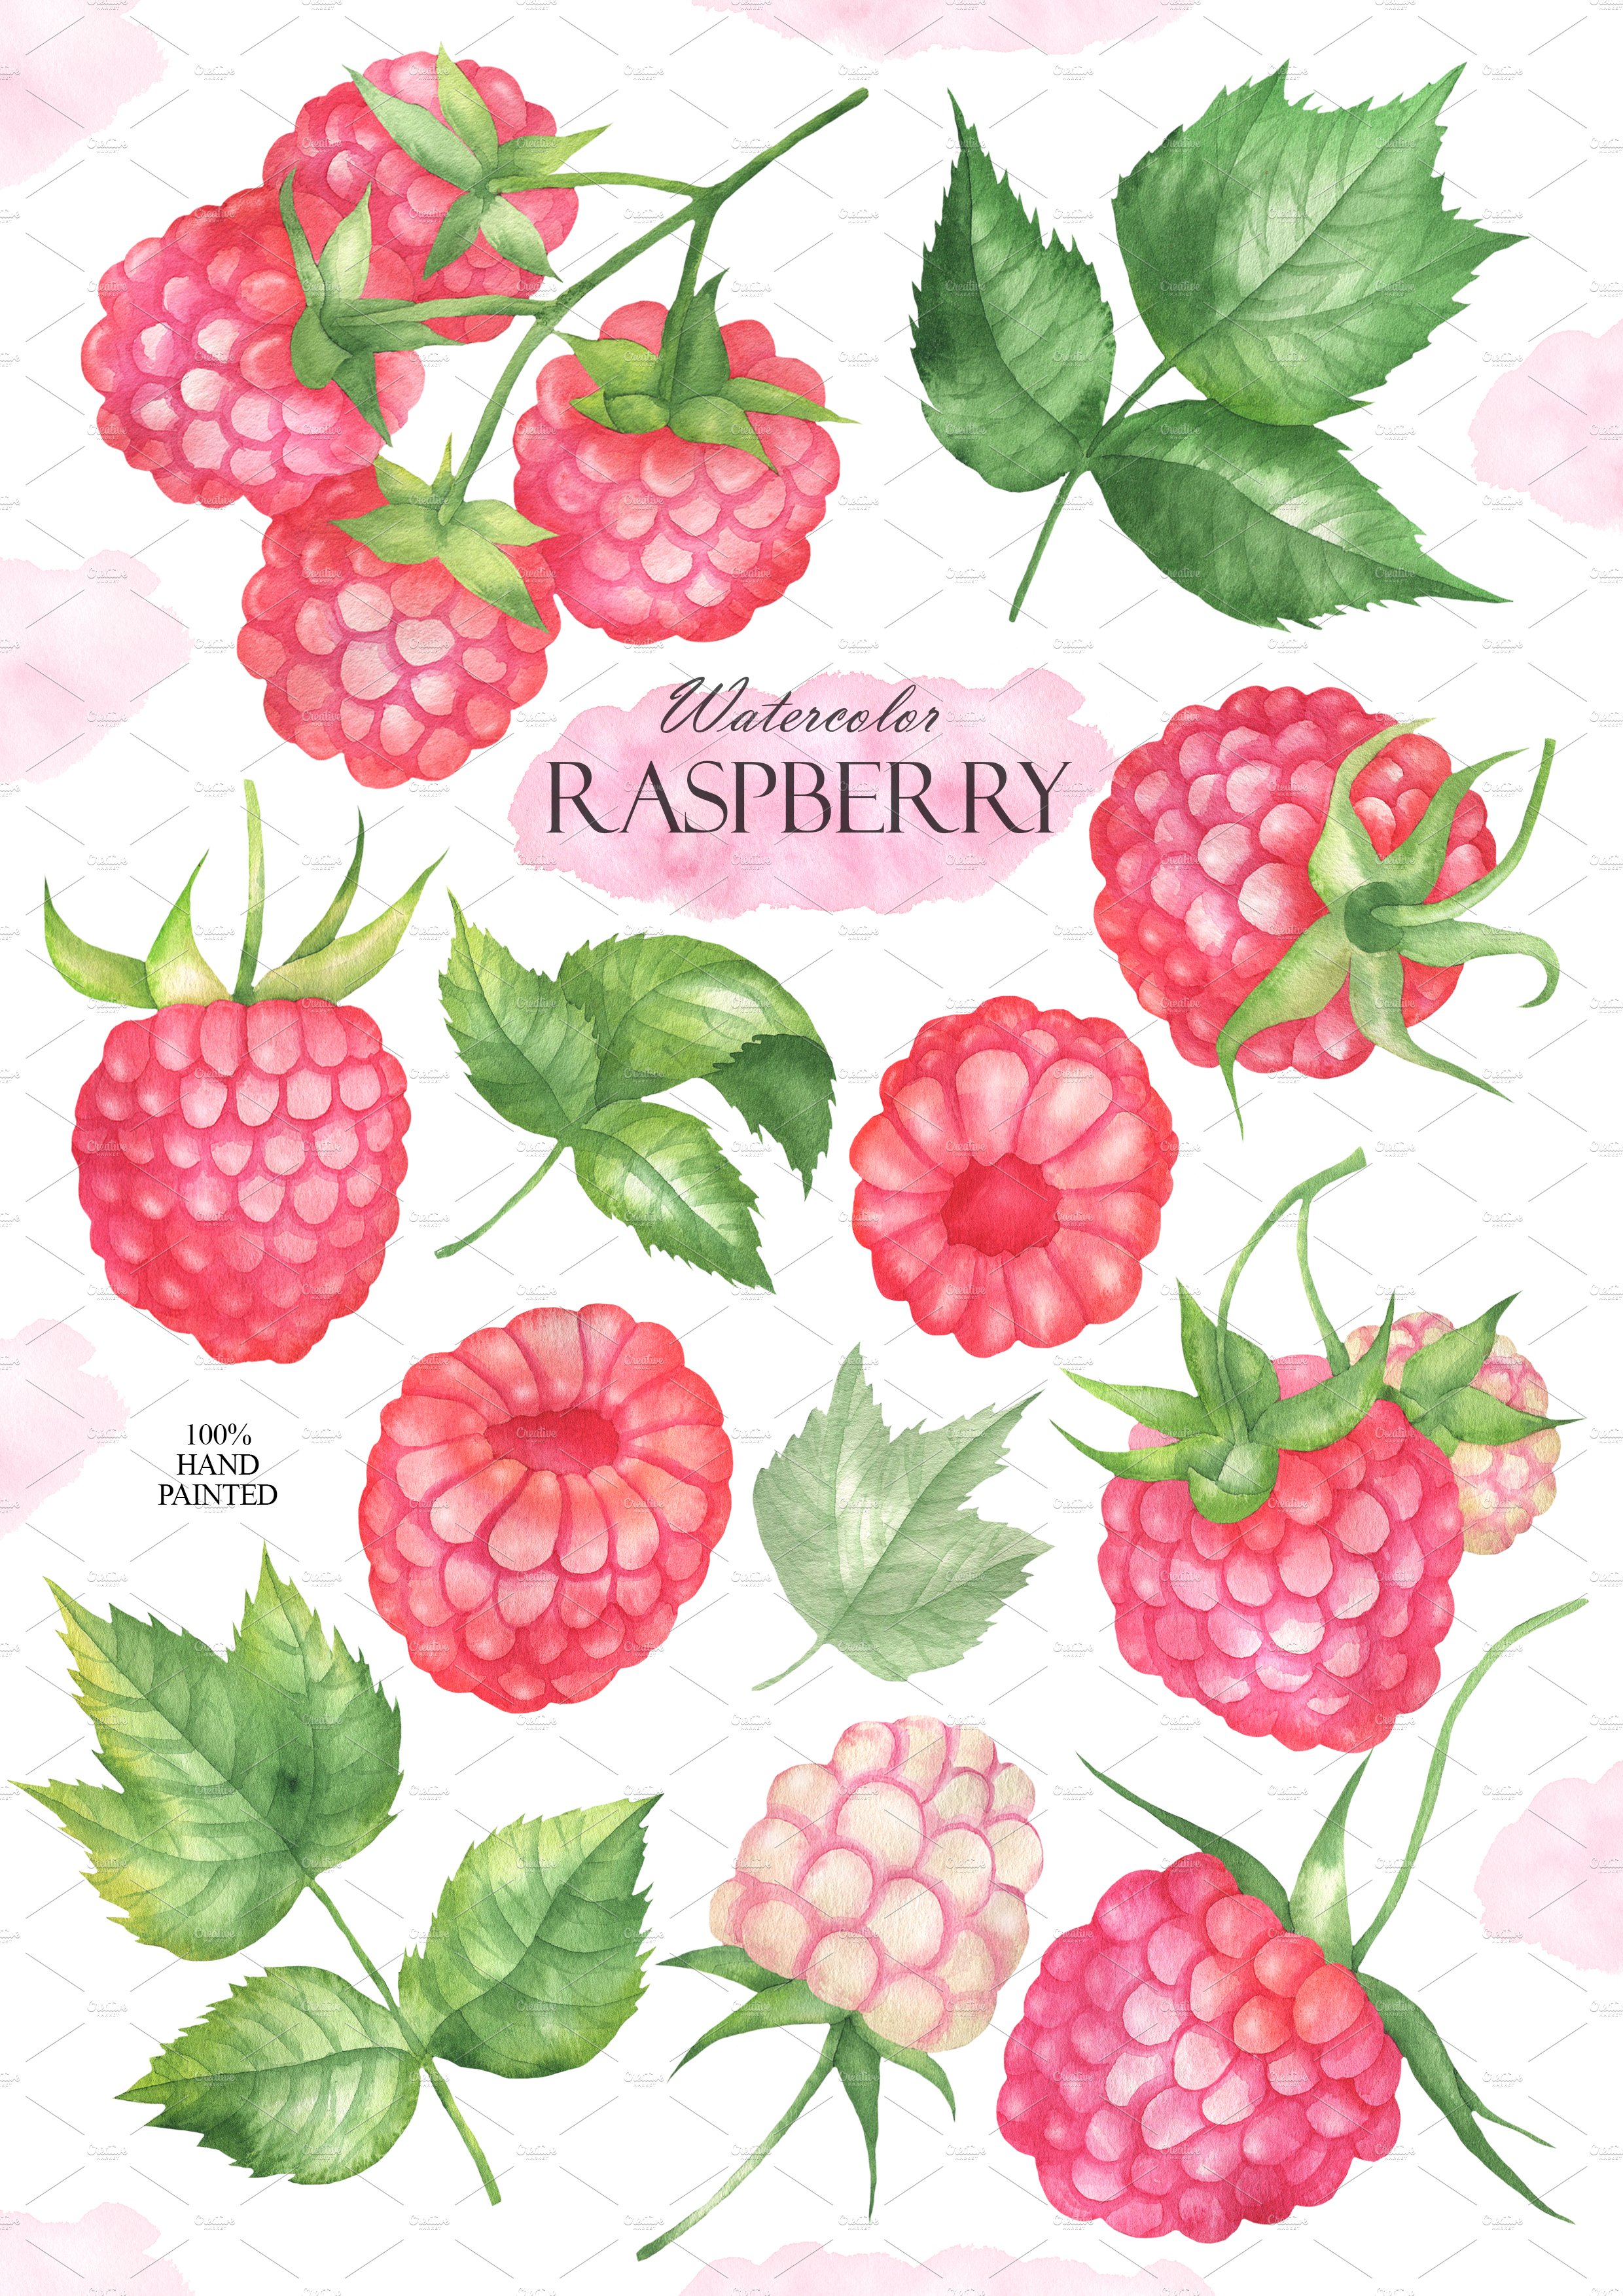 Watercolor Raspberry preview image.